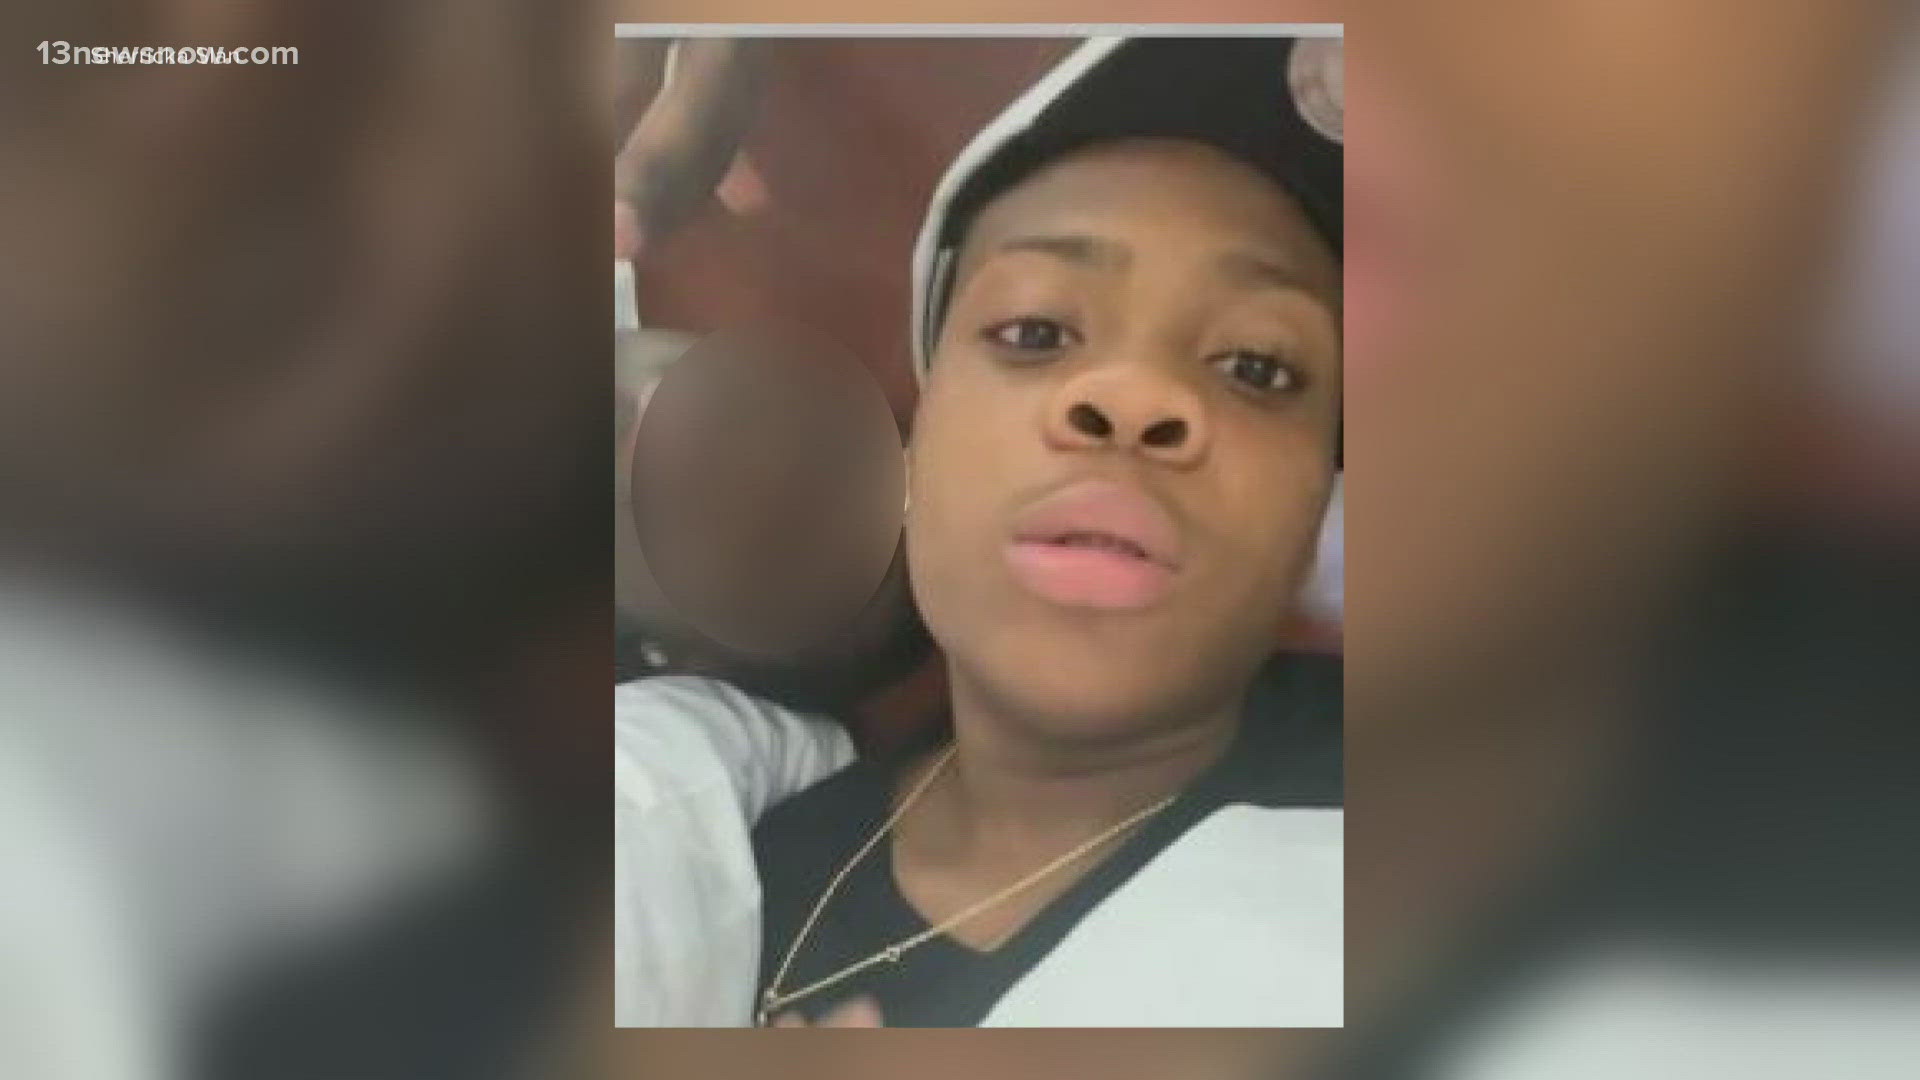 A 17-year-old boy is now charged in connection with a deadly shooting in Chesapeake.